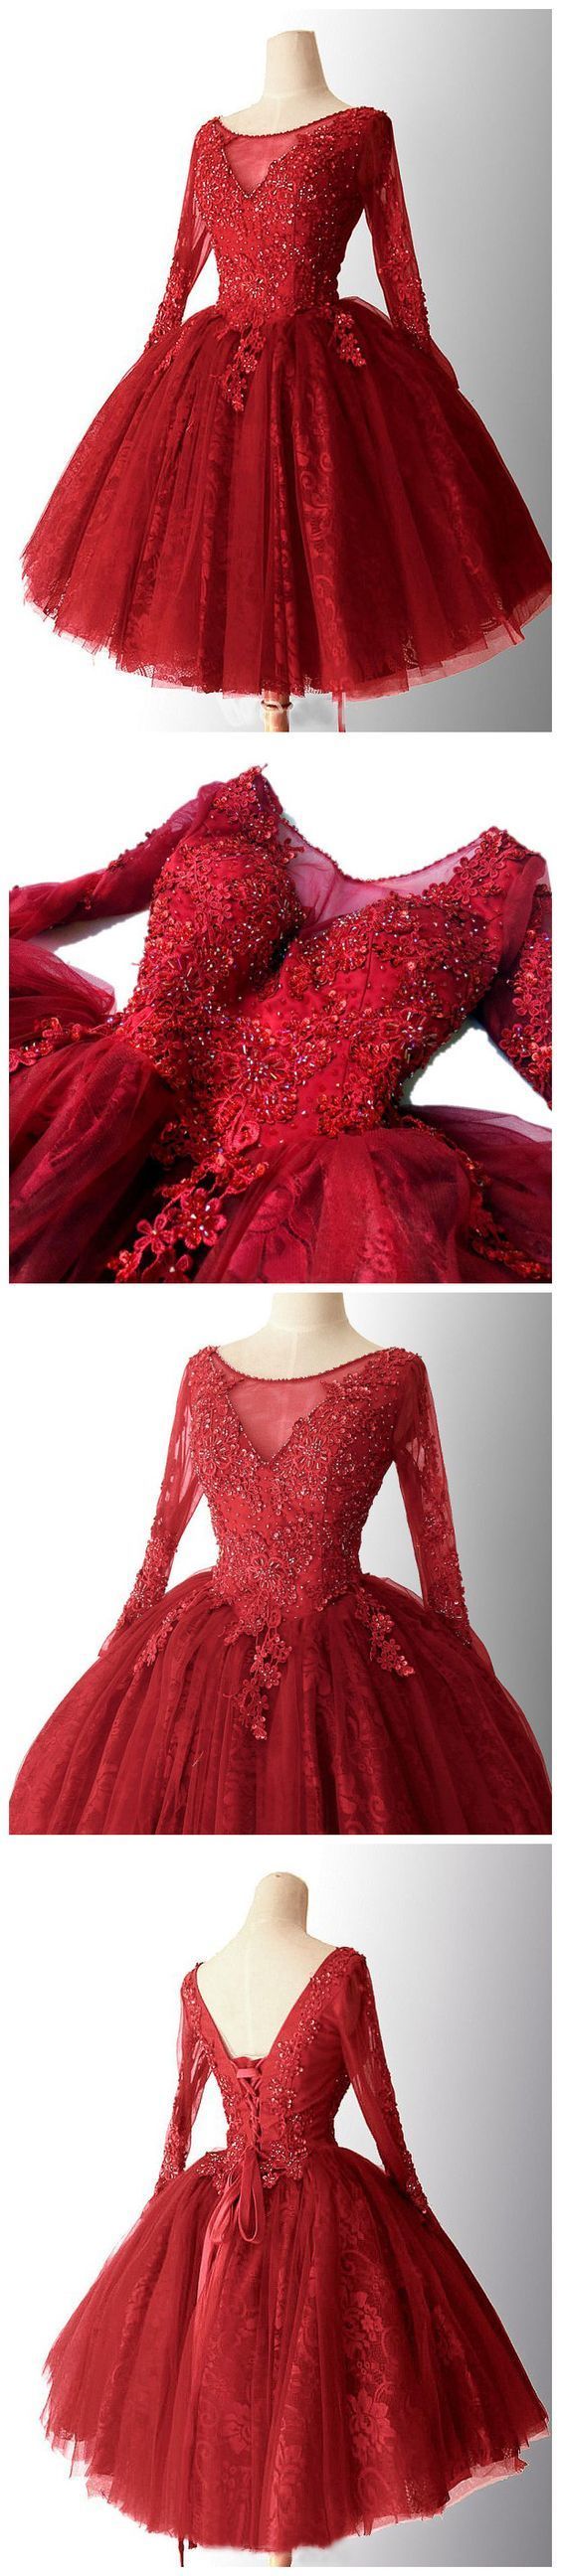 Chic A-line Red Homecoming Dresses Lace Short Prom Dress Long Sleeve Homecoming Dress